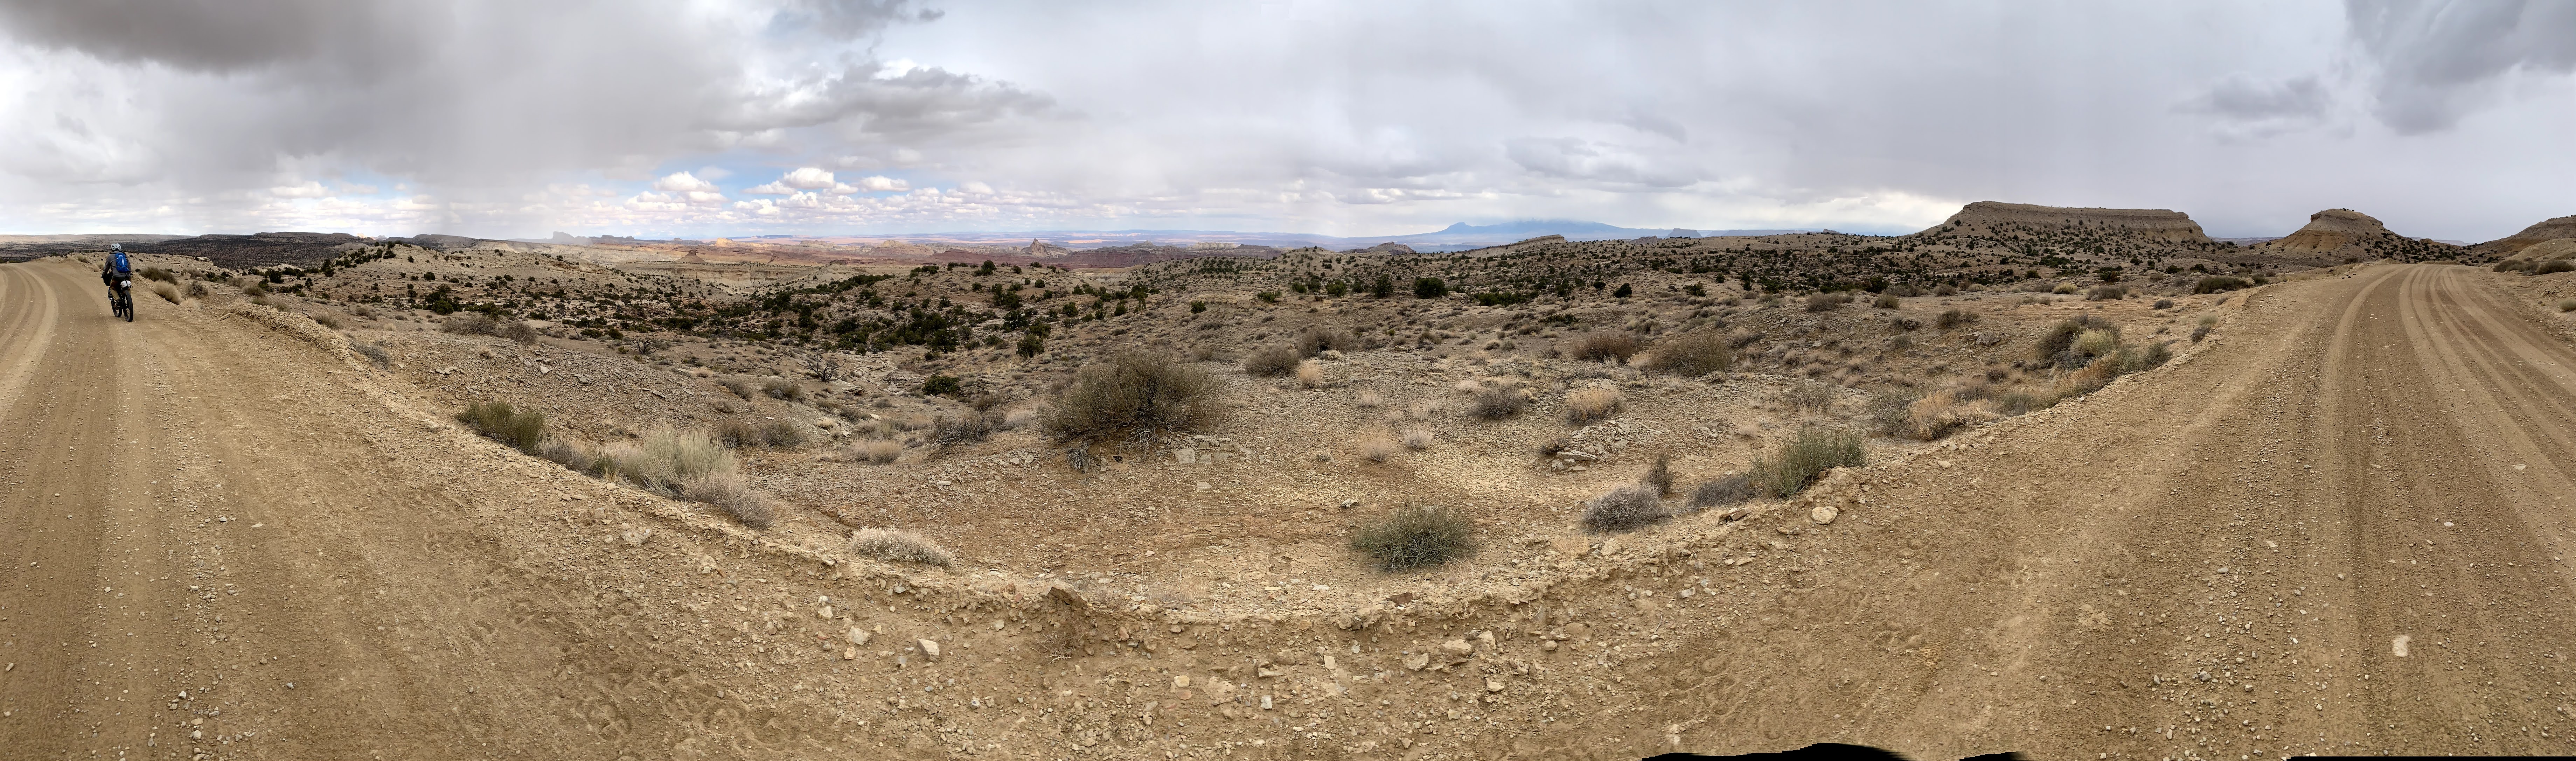 Pano of the trail at another bend